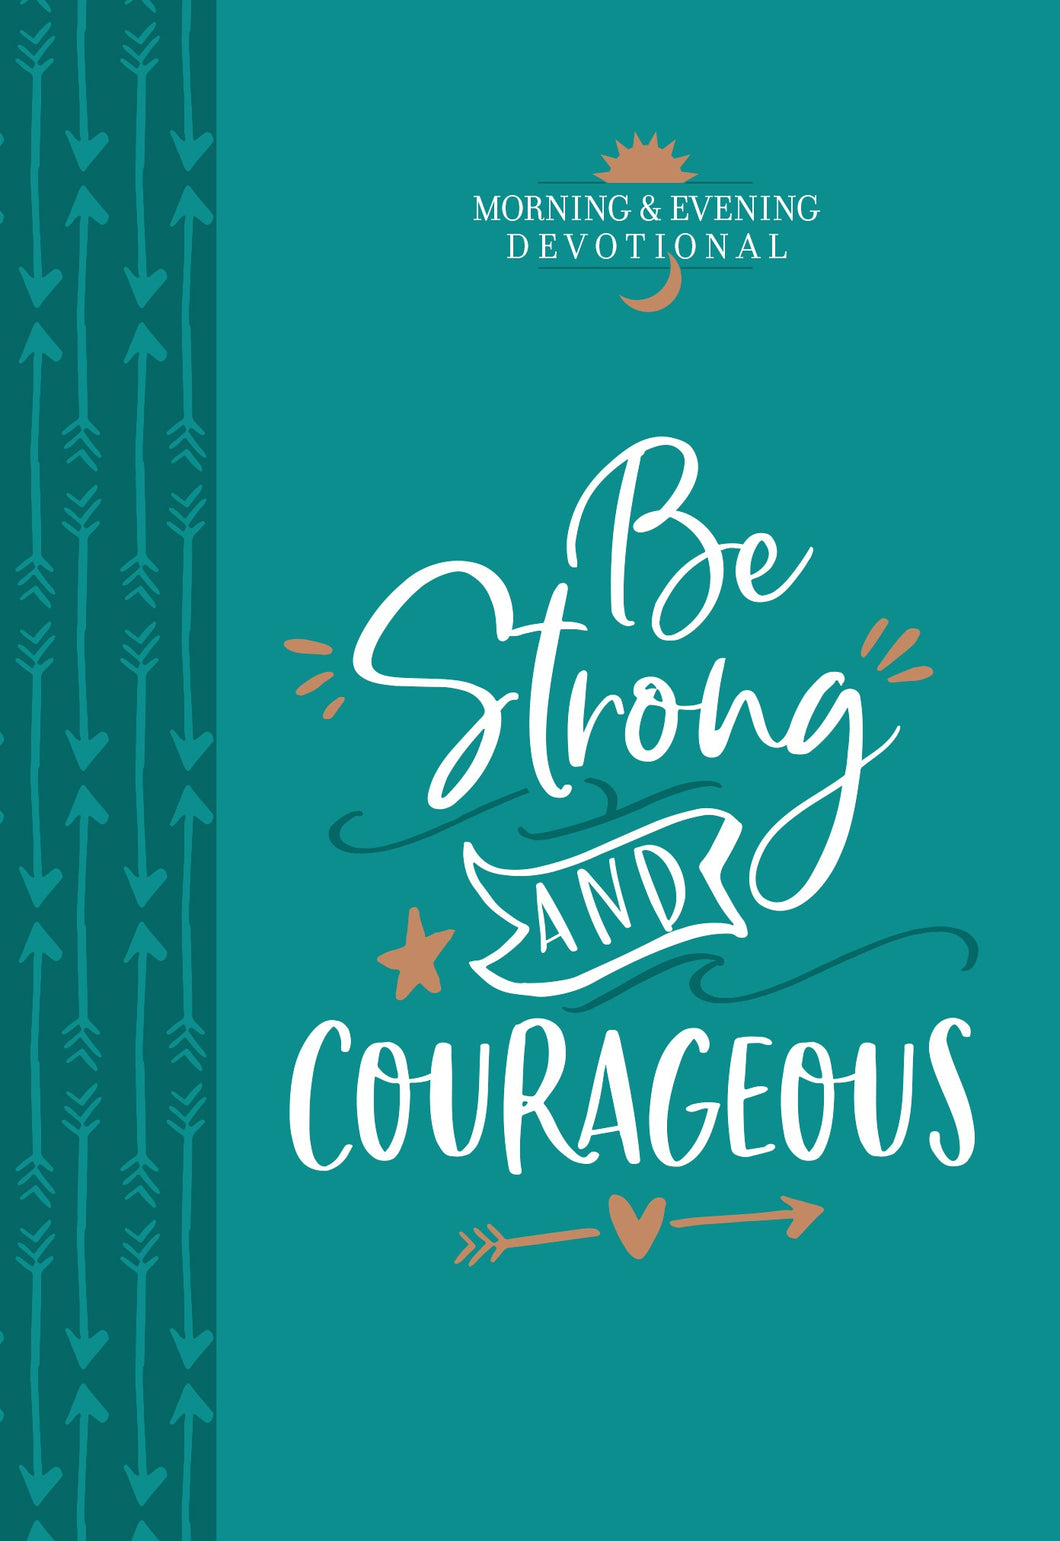 Be Strong And Courageous (Morning & Evening Devotional)